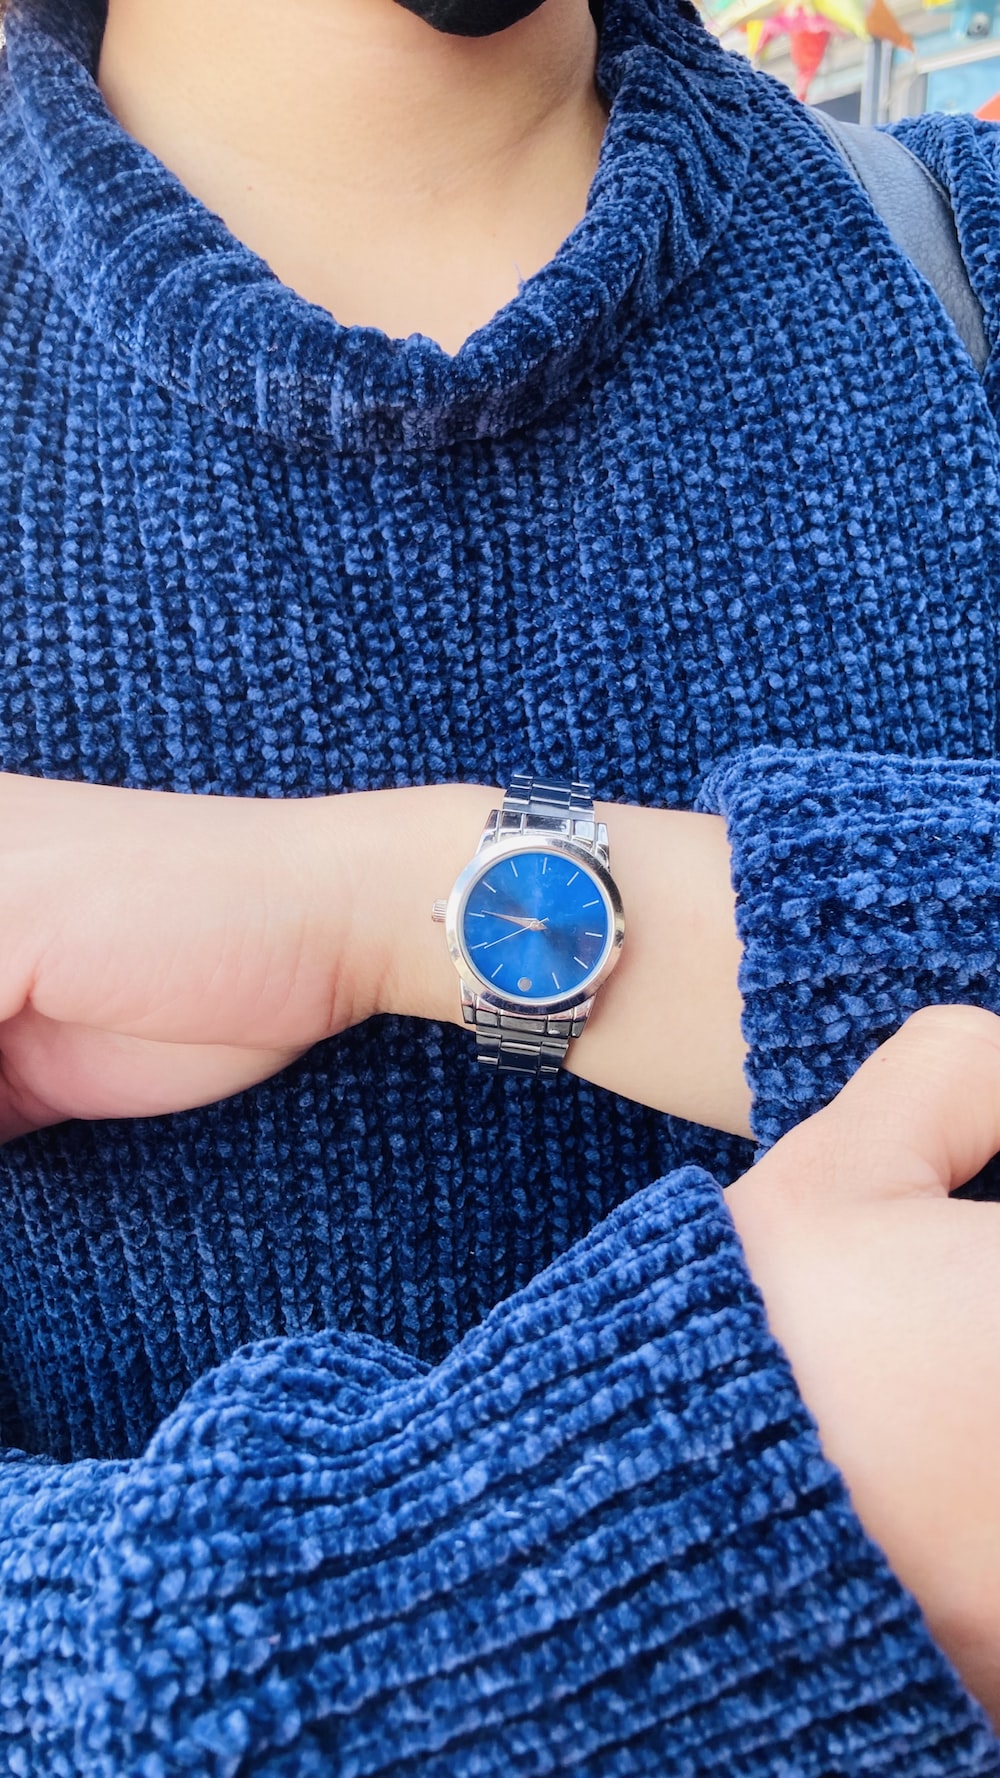 a woman wearing a blue sweater and a watch